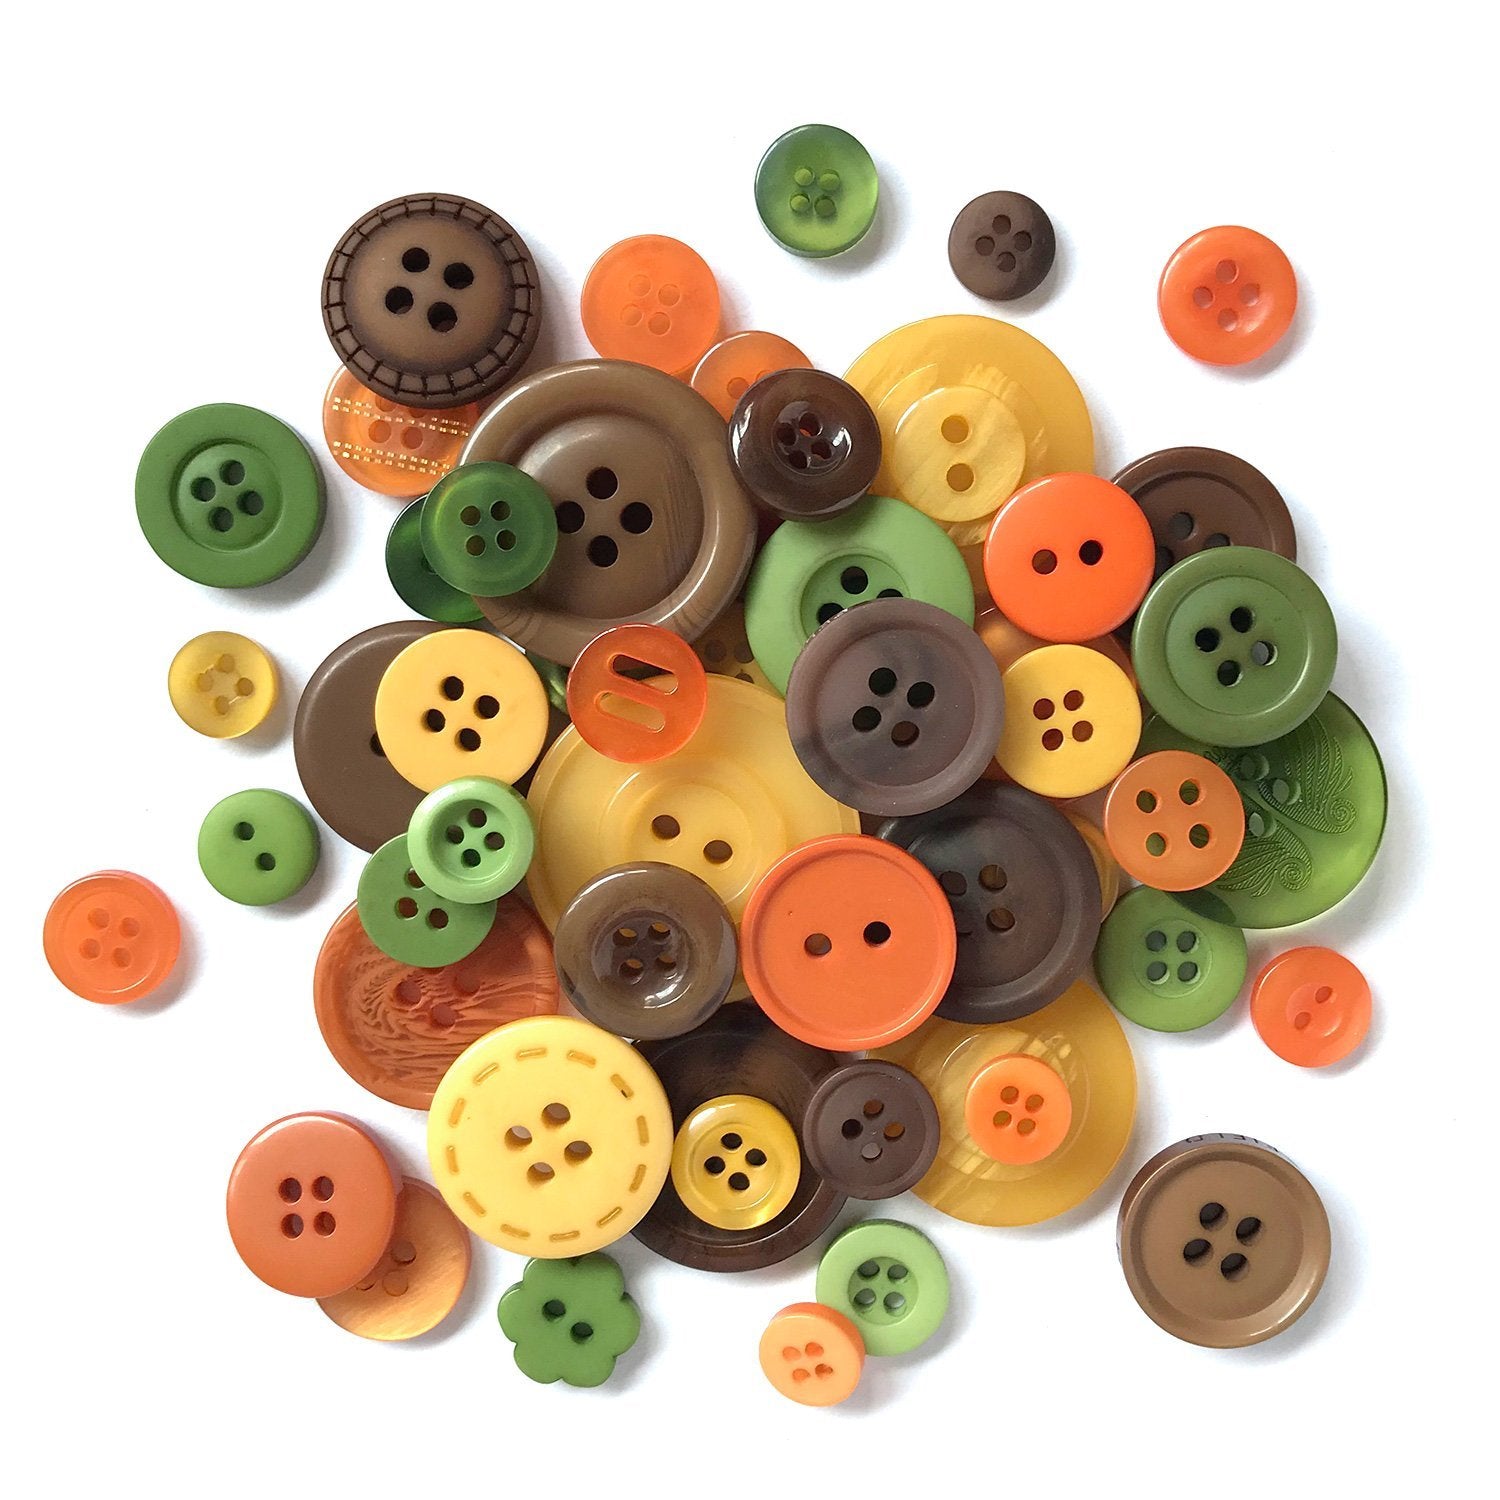 Buttons Galore and More - Sequins - Embellishments - Assorted - 8 Pack